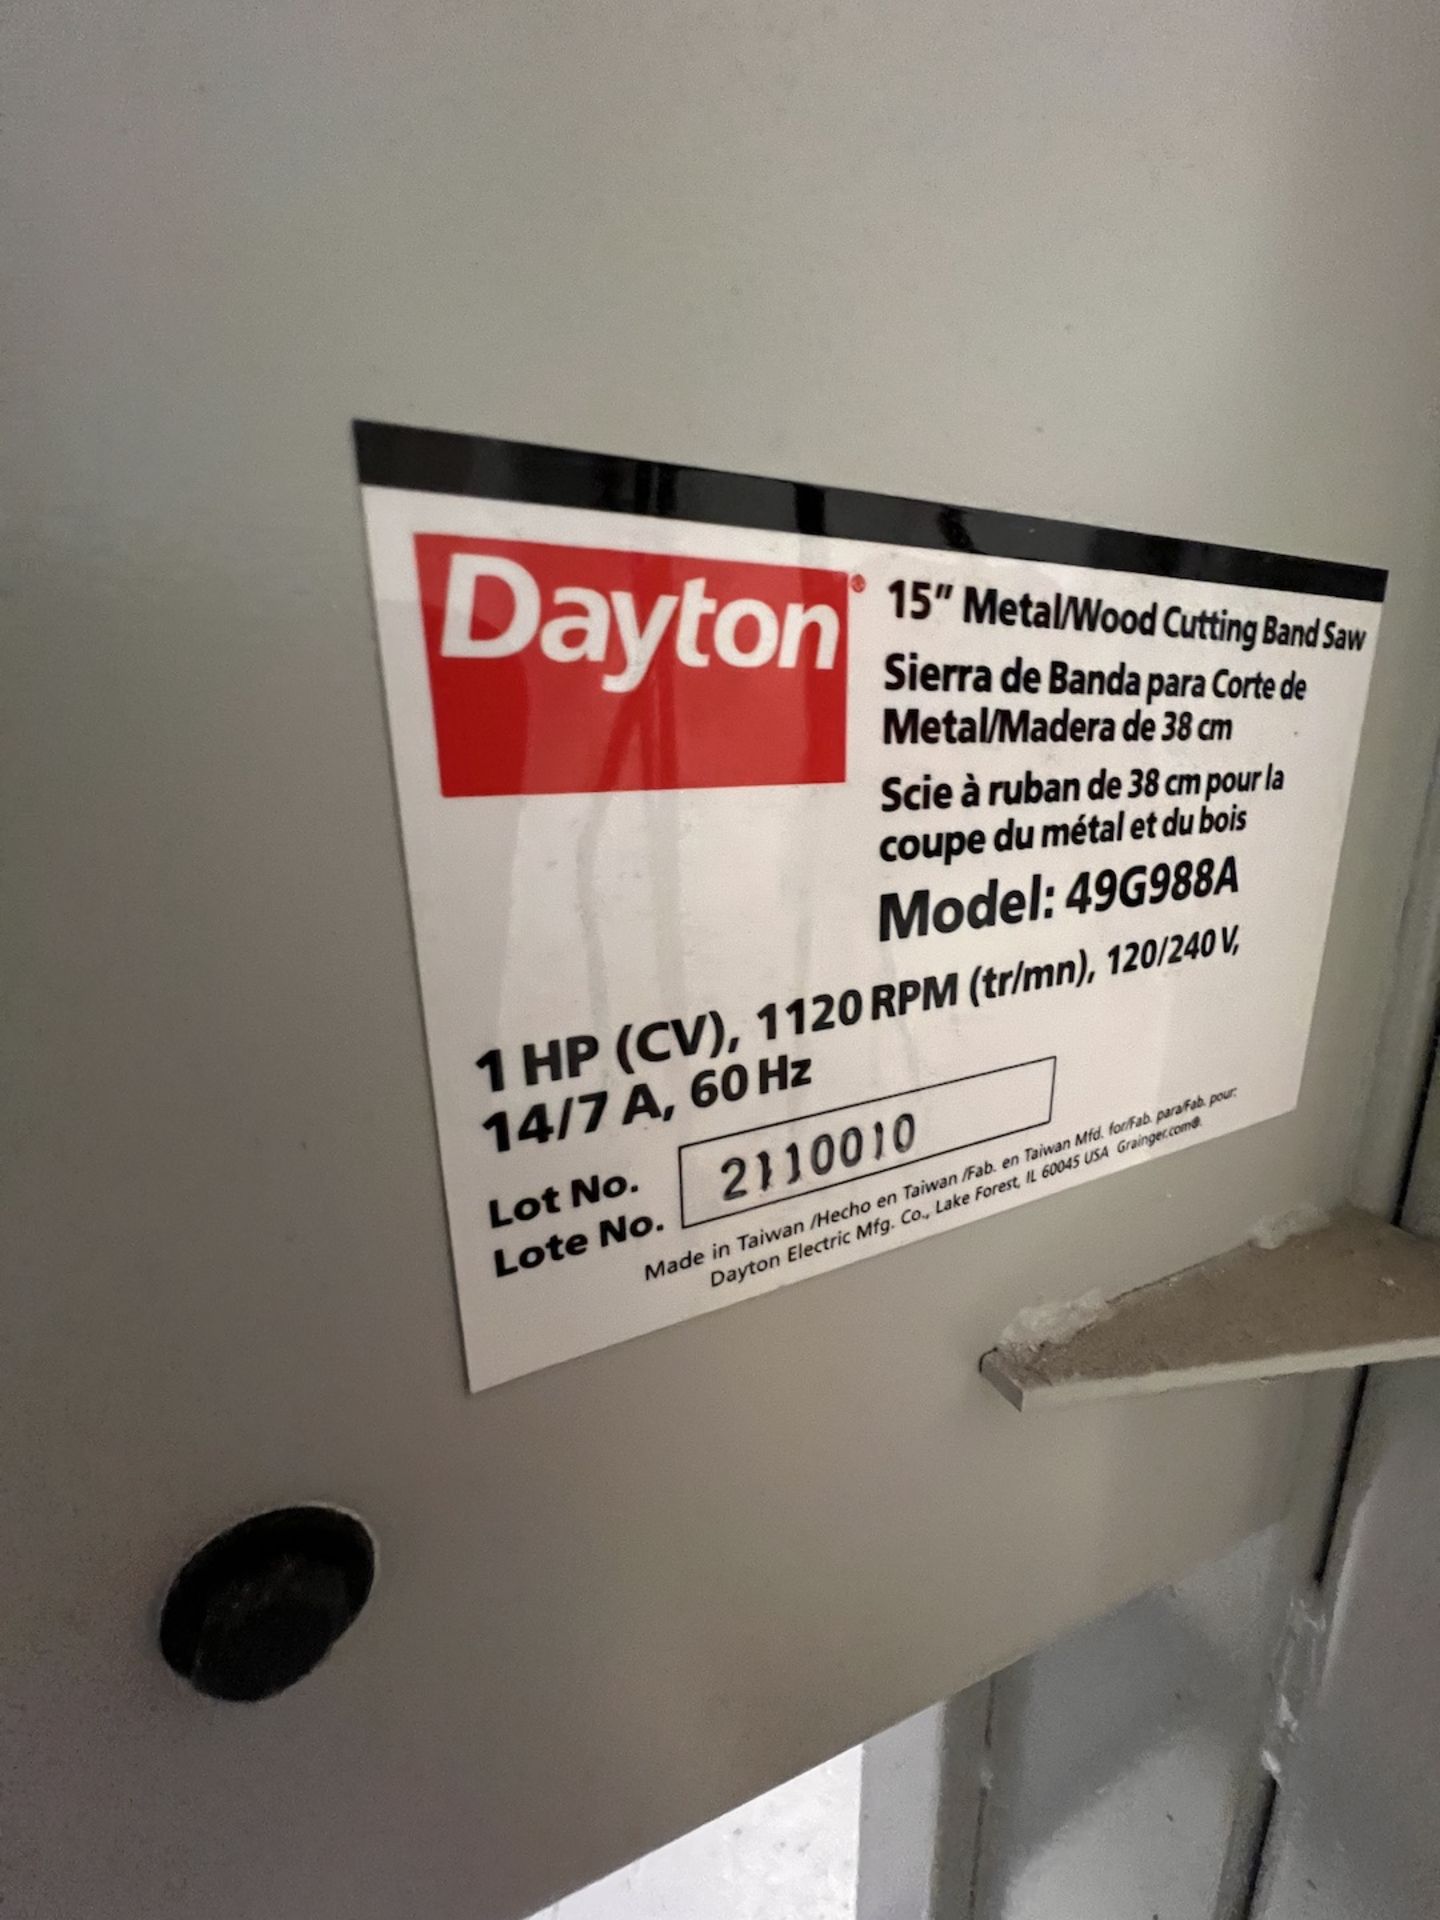 DAYTON 15 IN. METAL/WOOD CUTTING BAND SAW, MODEL 49G988A, S/N 2110010, 1-HP, 1120 RPM, 120/240 V - Image 4 of 6